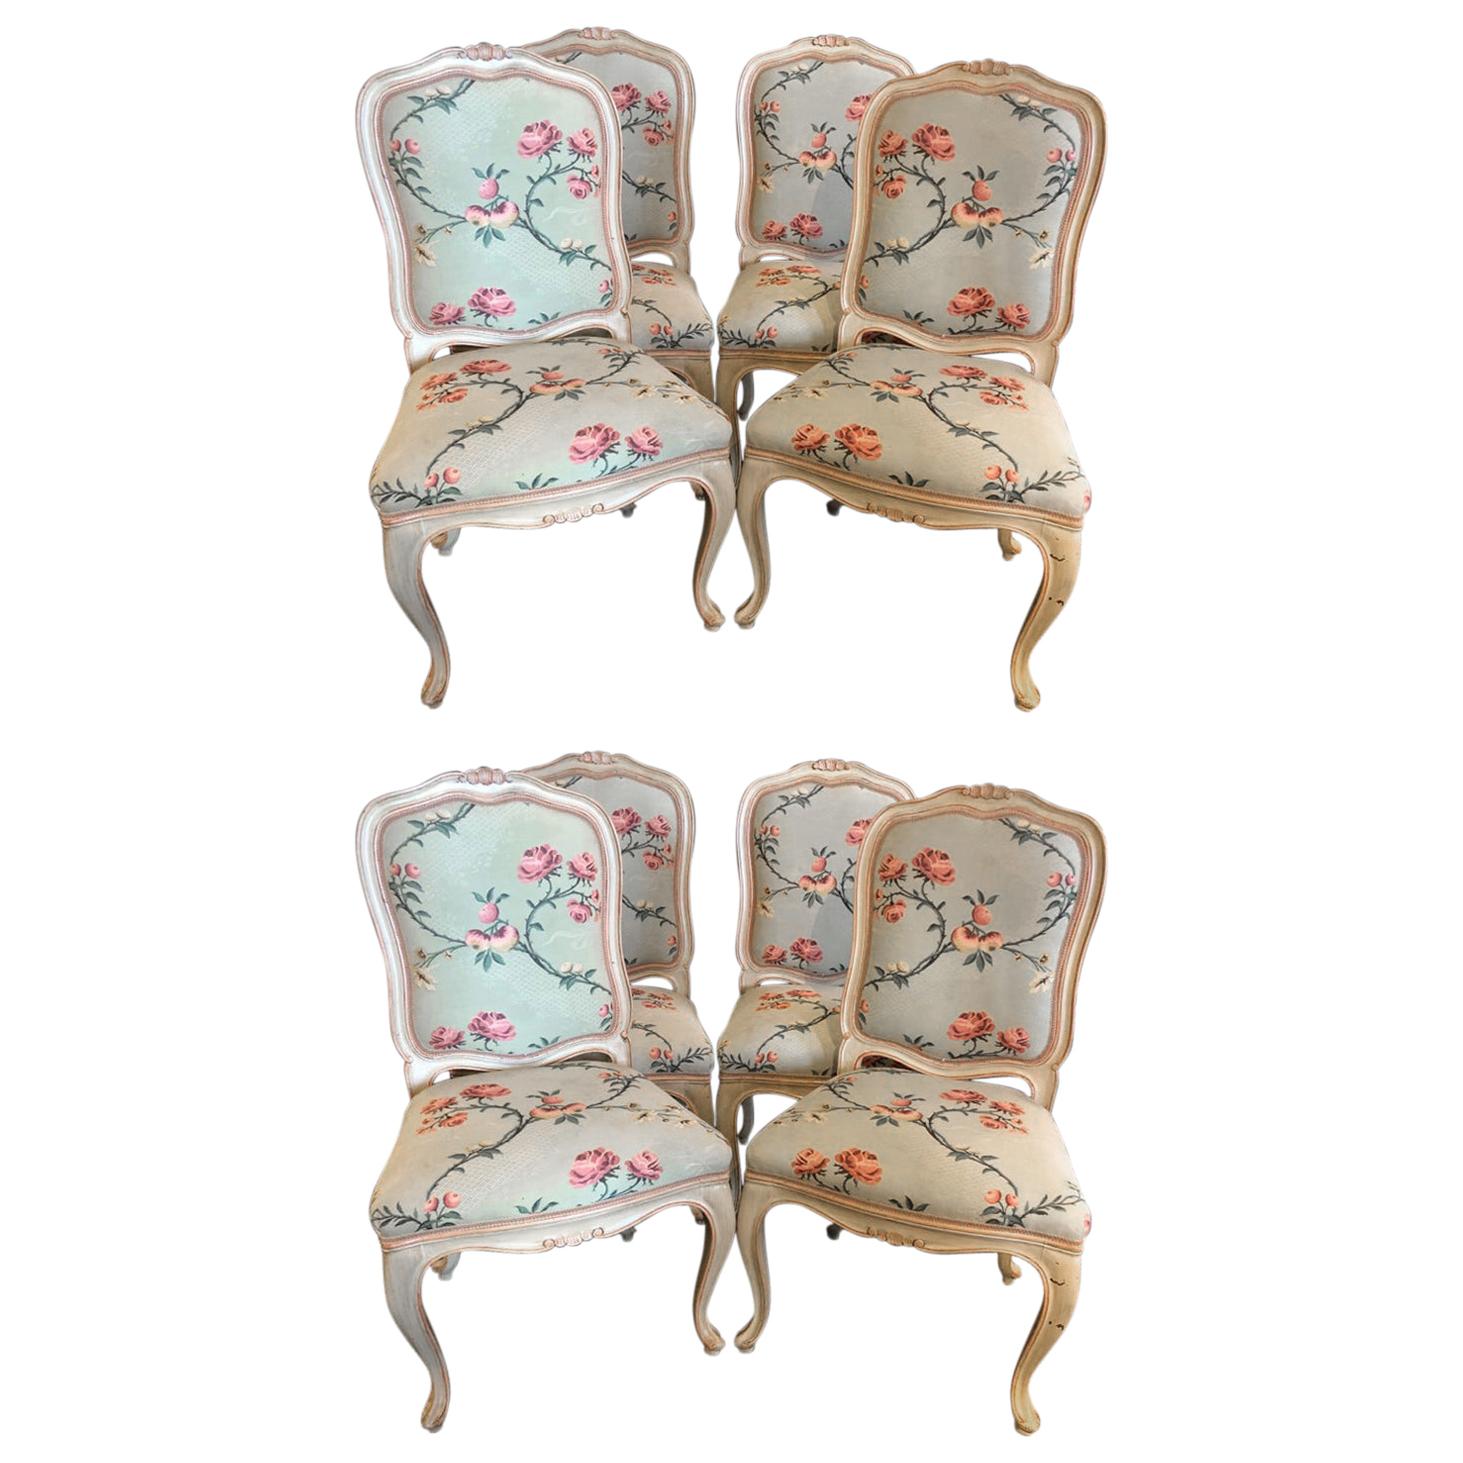 Suite of Eight Louis XV Style Polychrome Chairs, Made in Italy